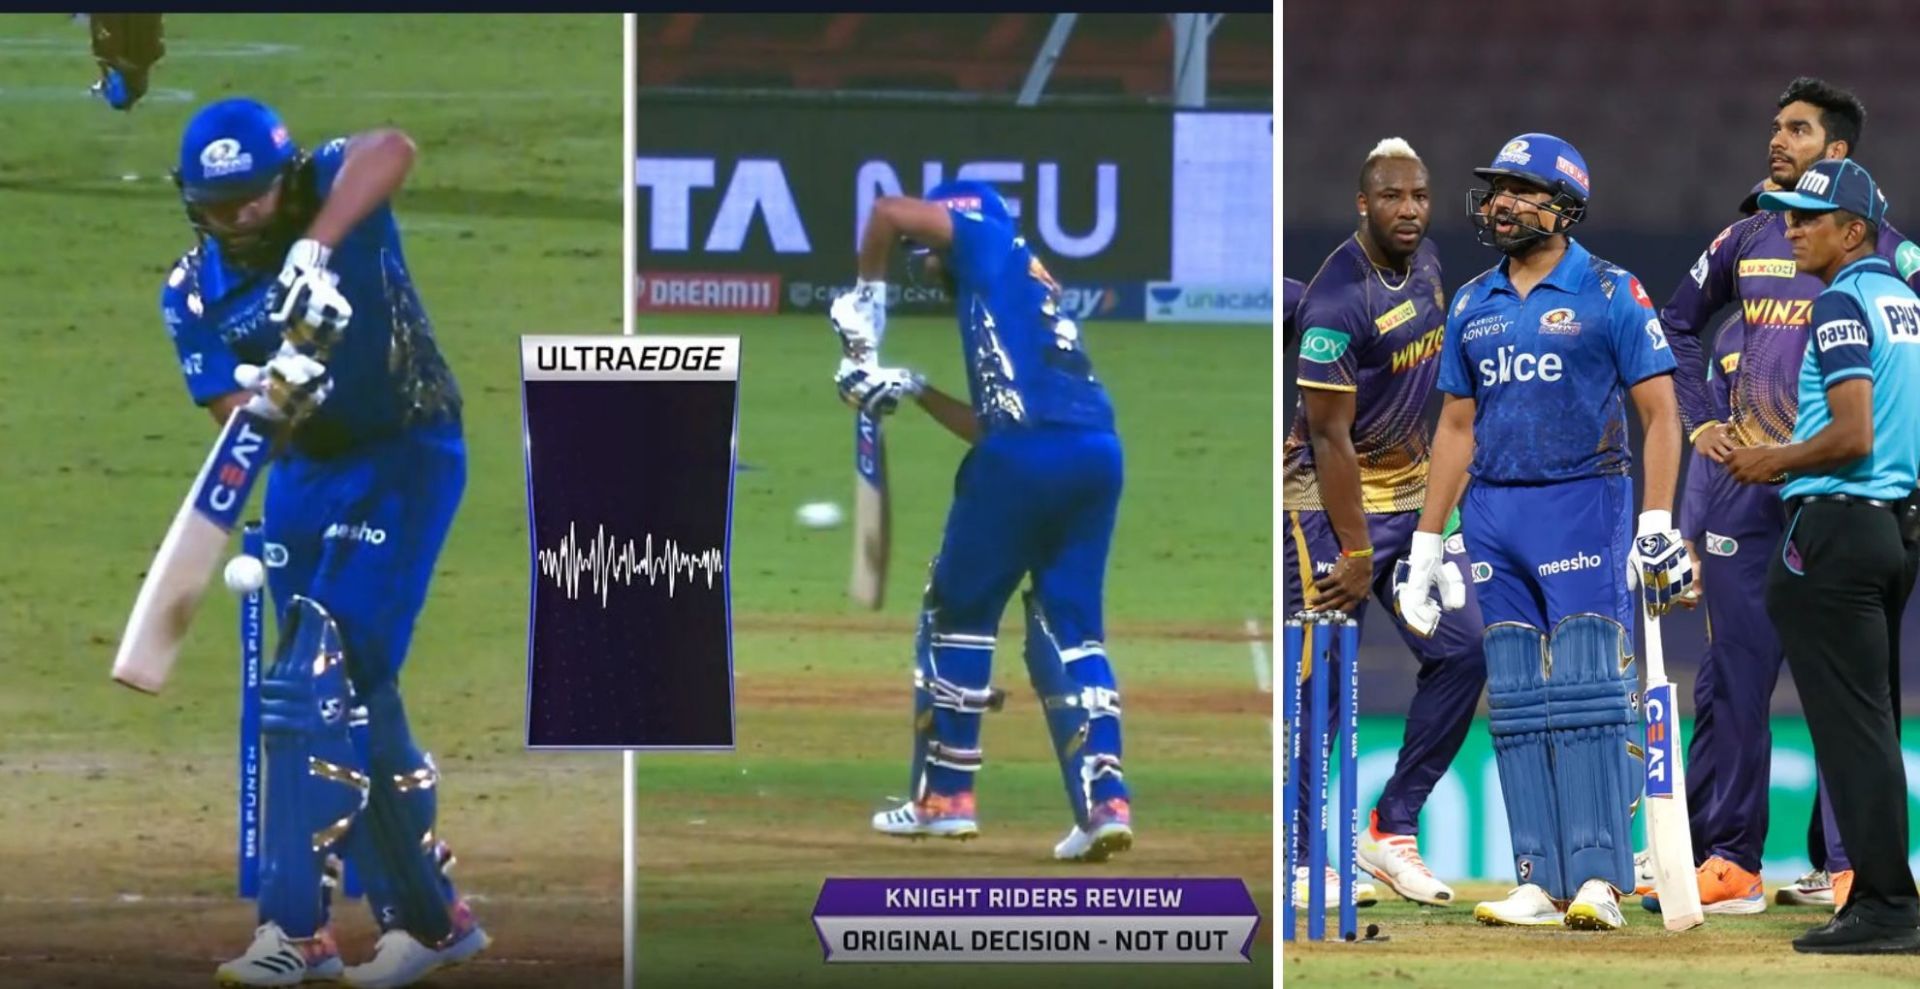 Rohit Sharma got out to a contentious decision vs KKR (Credit: Twitter)